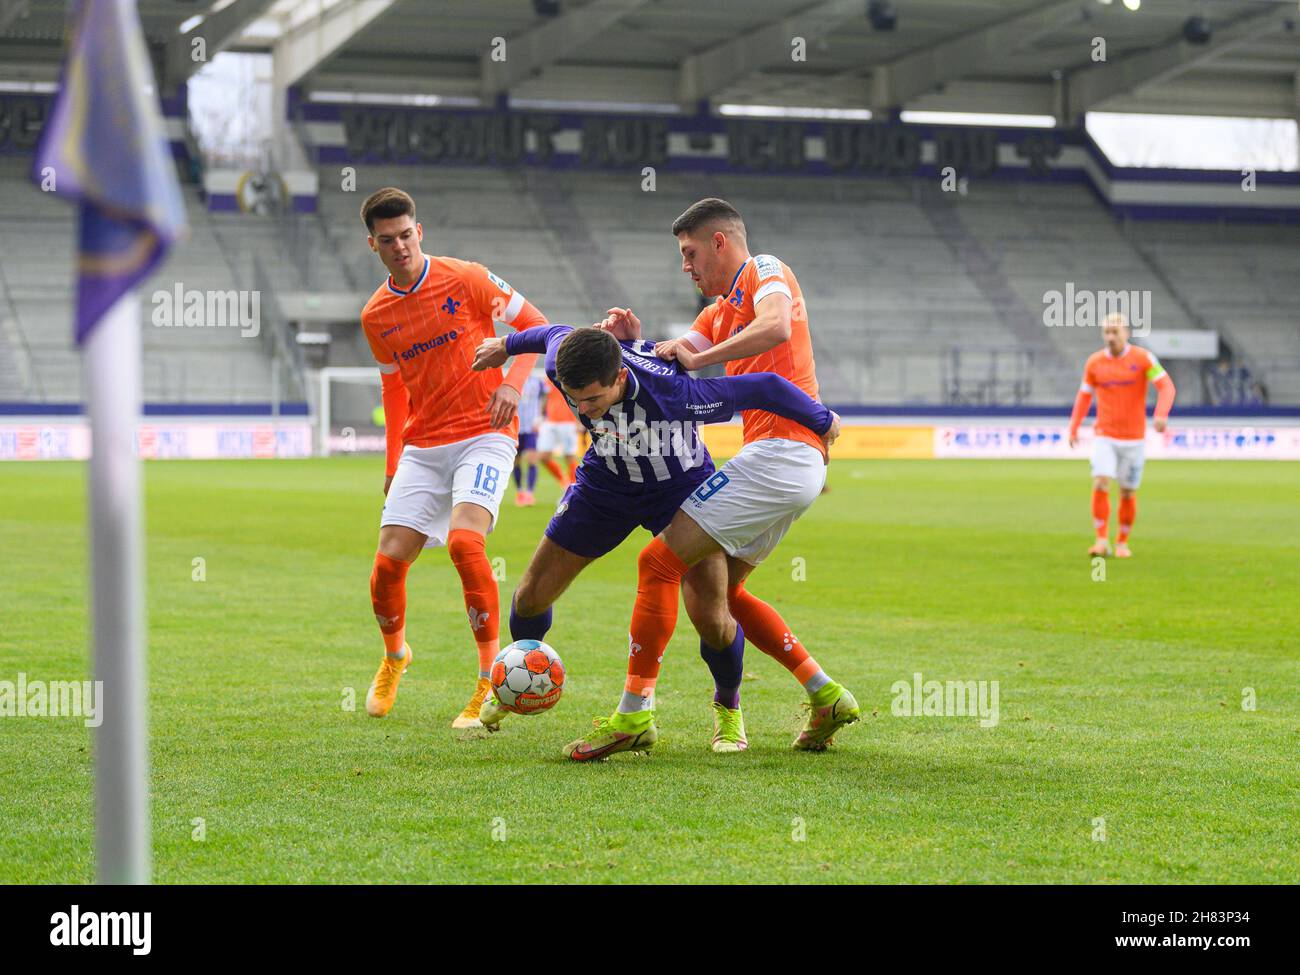 Aue, Germany. 27th Nov, 2021. Football: 2. Bundesliga, FC Erzgebirge Aue - SV Darmstadt 98, Matchday 15, Erzgebirgsstadion. Aue's Antonio Jonjic (M) against Darmstadt's Mathias Honsak (l) and Emir Karic. Credit: Robert Michael/dpa-Zentralbild/dpa - IMPORTANT NOTE: In accordance with the regulations of the DFL Deutsche Fußball Liga and/or the DFB Deutscher Fußball-Bund, it is prohibited to use or have used photographs taken in the stadium and/or of the match in the form of sequence pictures and/or video-like photo series./dpa/Alamy Live News Credit: dpa picture alliance/Alamy Live News Stock Photo